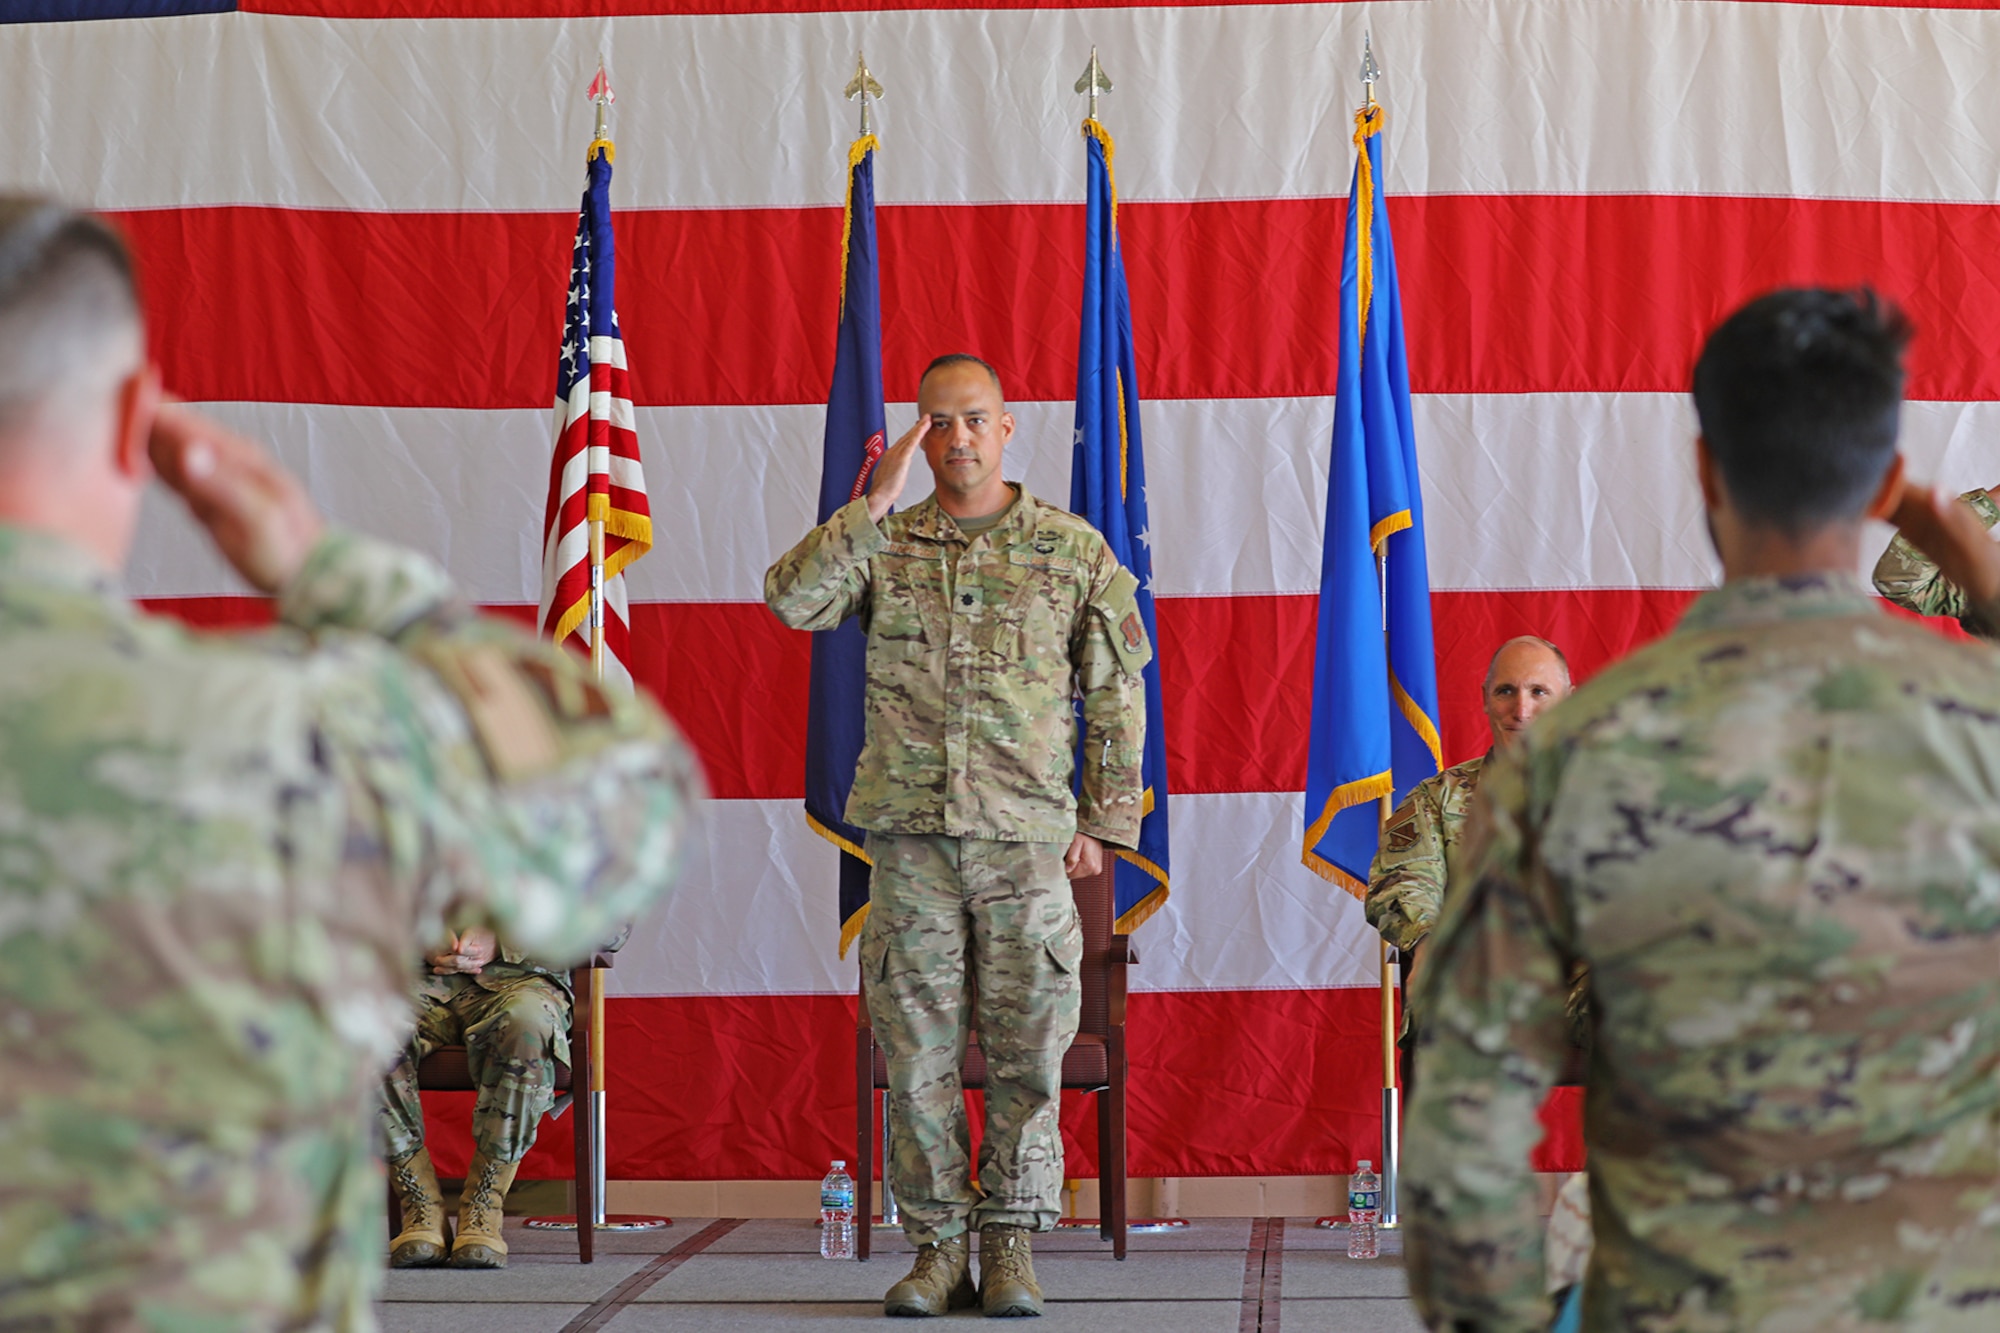 Lt. Col. Sam Trapasso renders the first salute  to the 127th Mission Support Group during his change-of-command ceremony at Selfridge Air National Guard Base, Michigan, June 4, 2022. Trapasso took command of the 127th Mission Group from Col. Daniel Kramer at the ceremony. (U.S. Air National Guard photo by Staff Sgt. Drew Schumann)